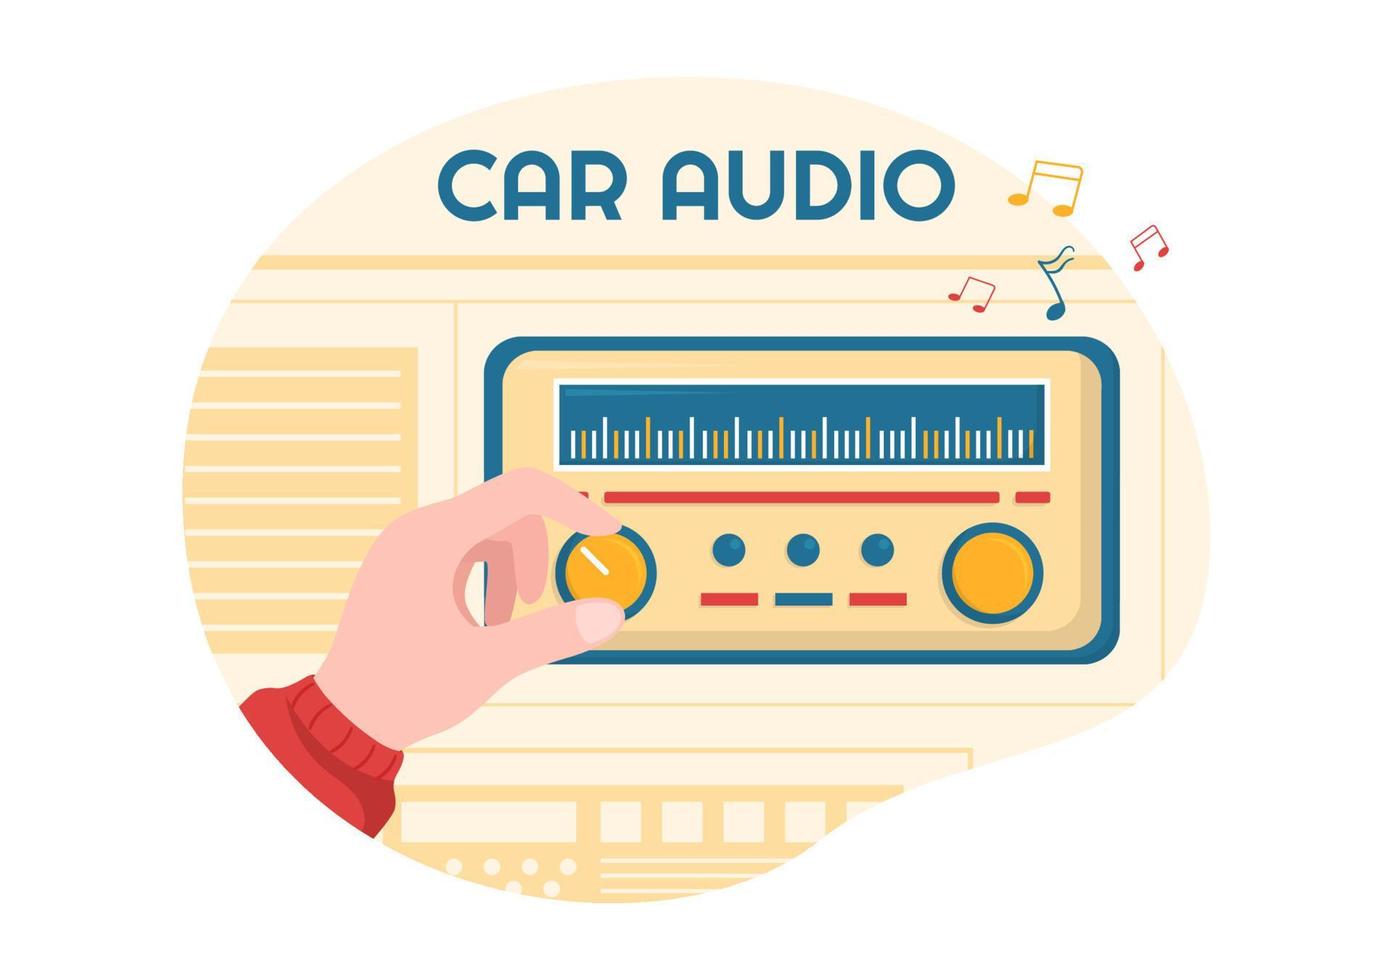 Driving a Car Listening to Music with Loud Speakers or Sound System in Flat Cartoon Poster Hand Drawn Templates Illustration vector